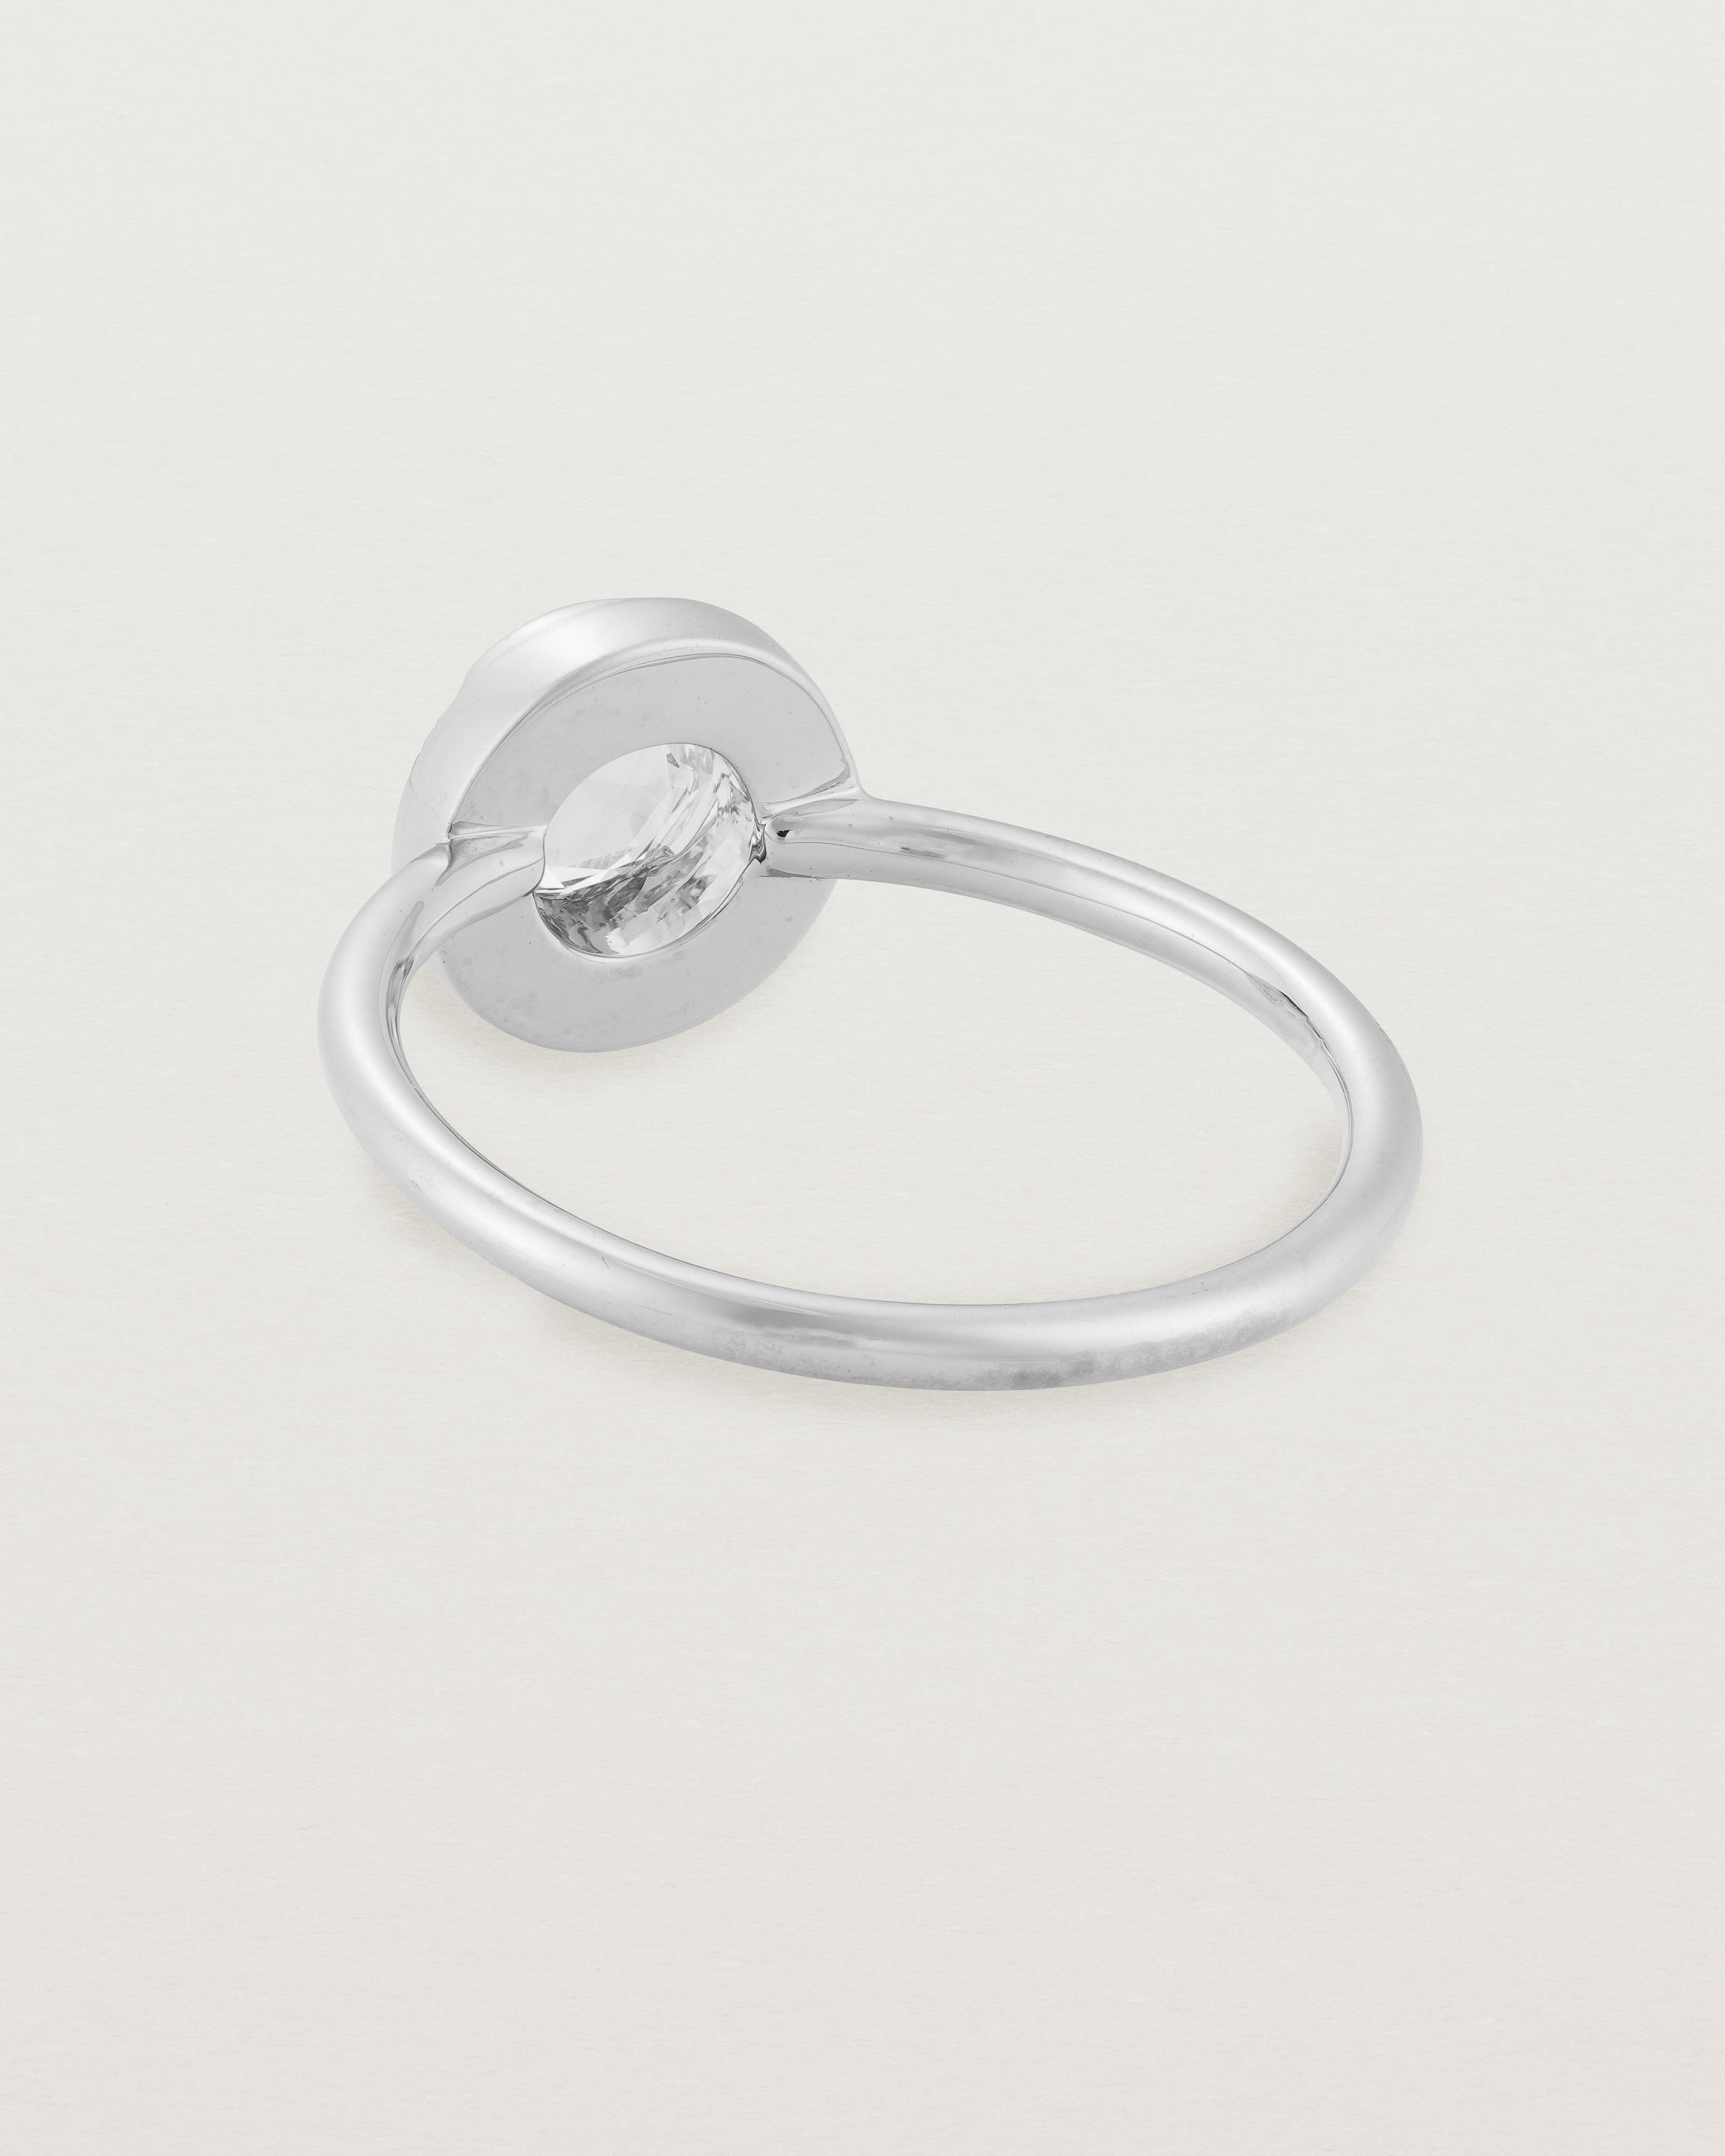 Back view of the Adeline Rose Cut Ring | Diamond | White Gold.